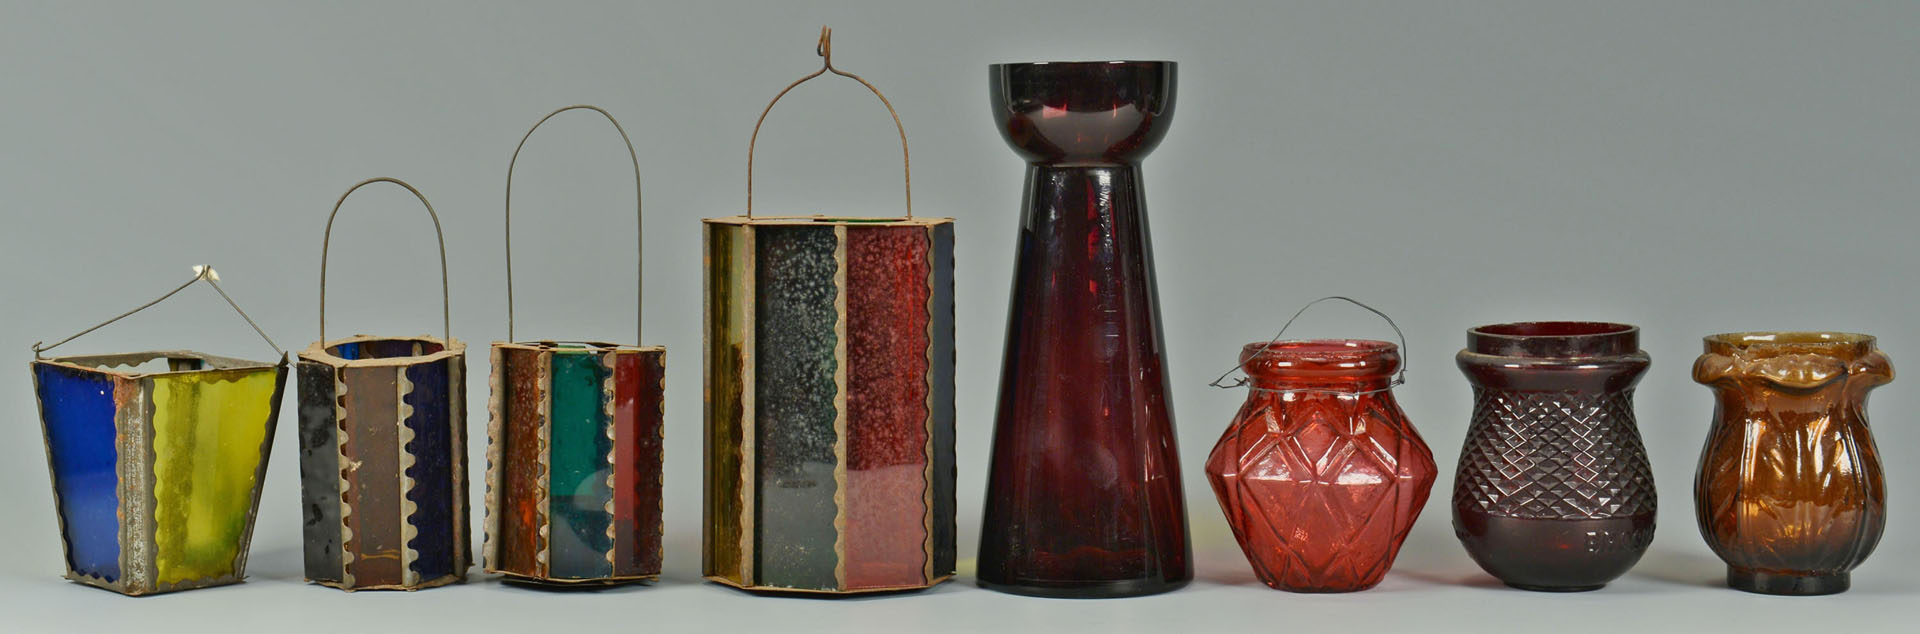 Lot 520: 12 Colored Christmas lights, lanterns, and vase